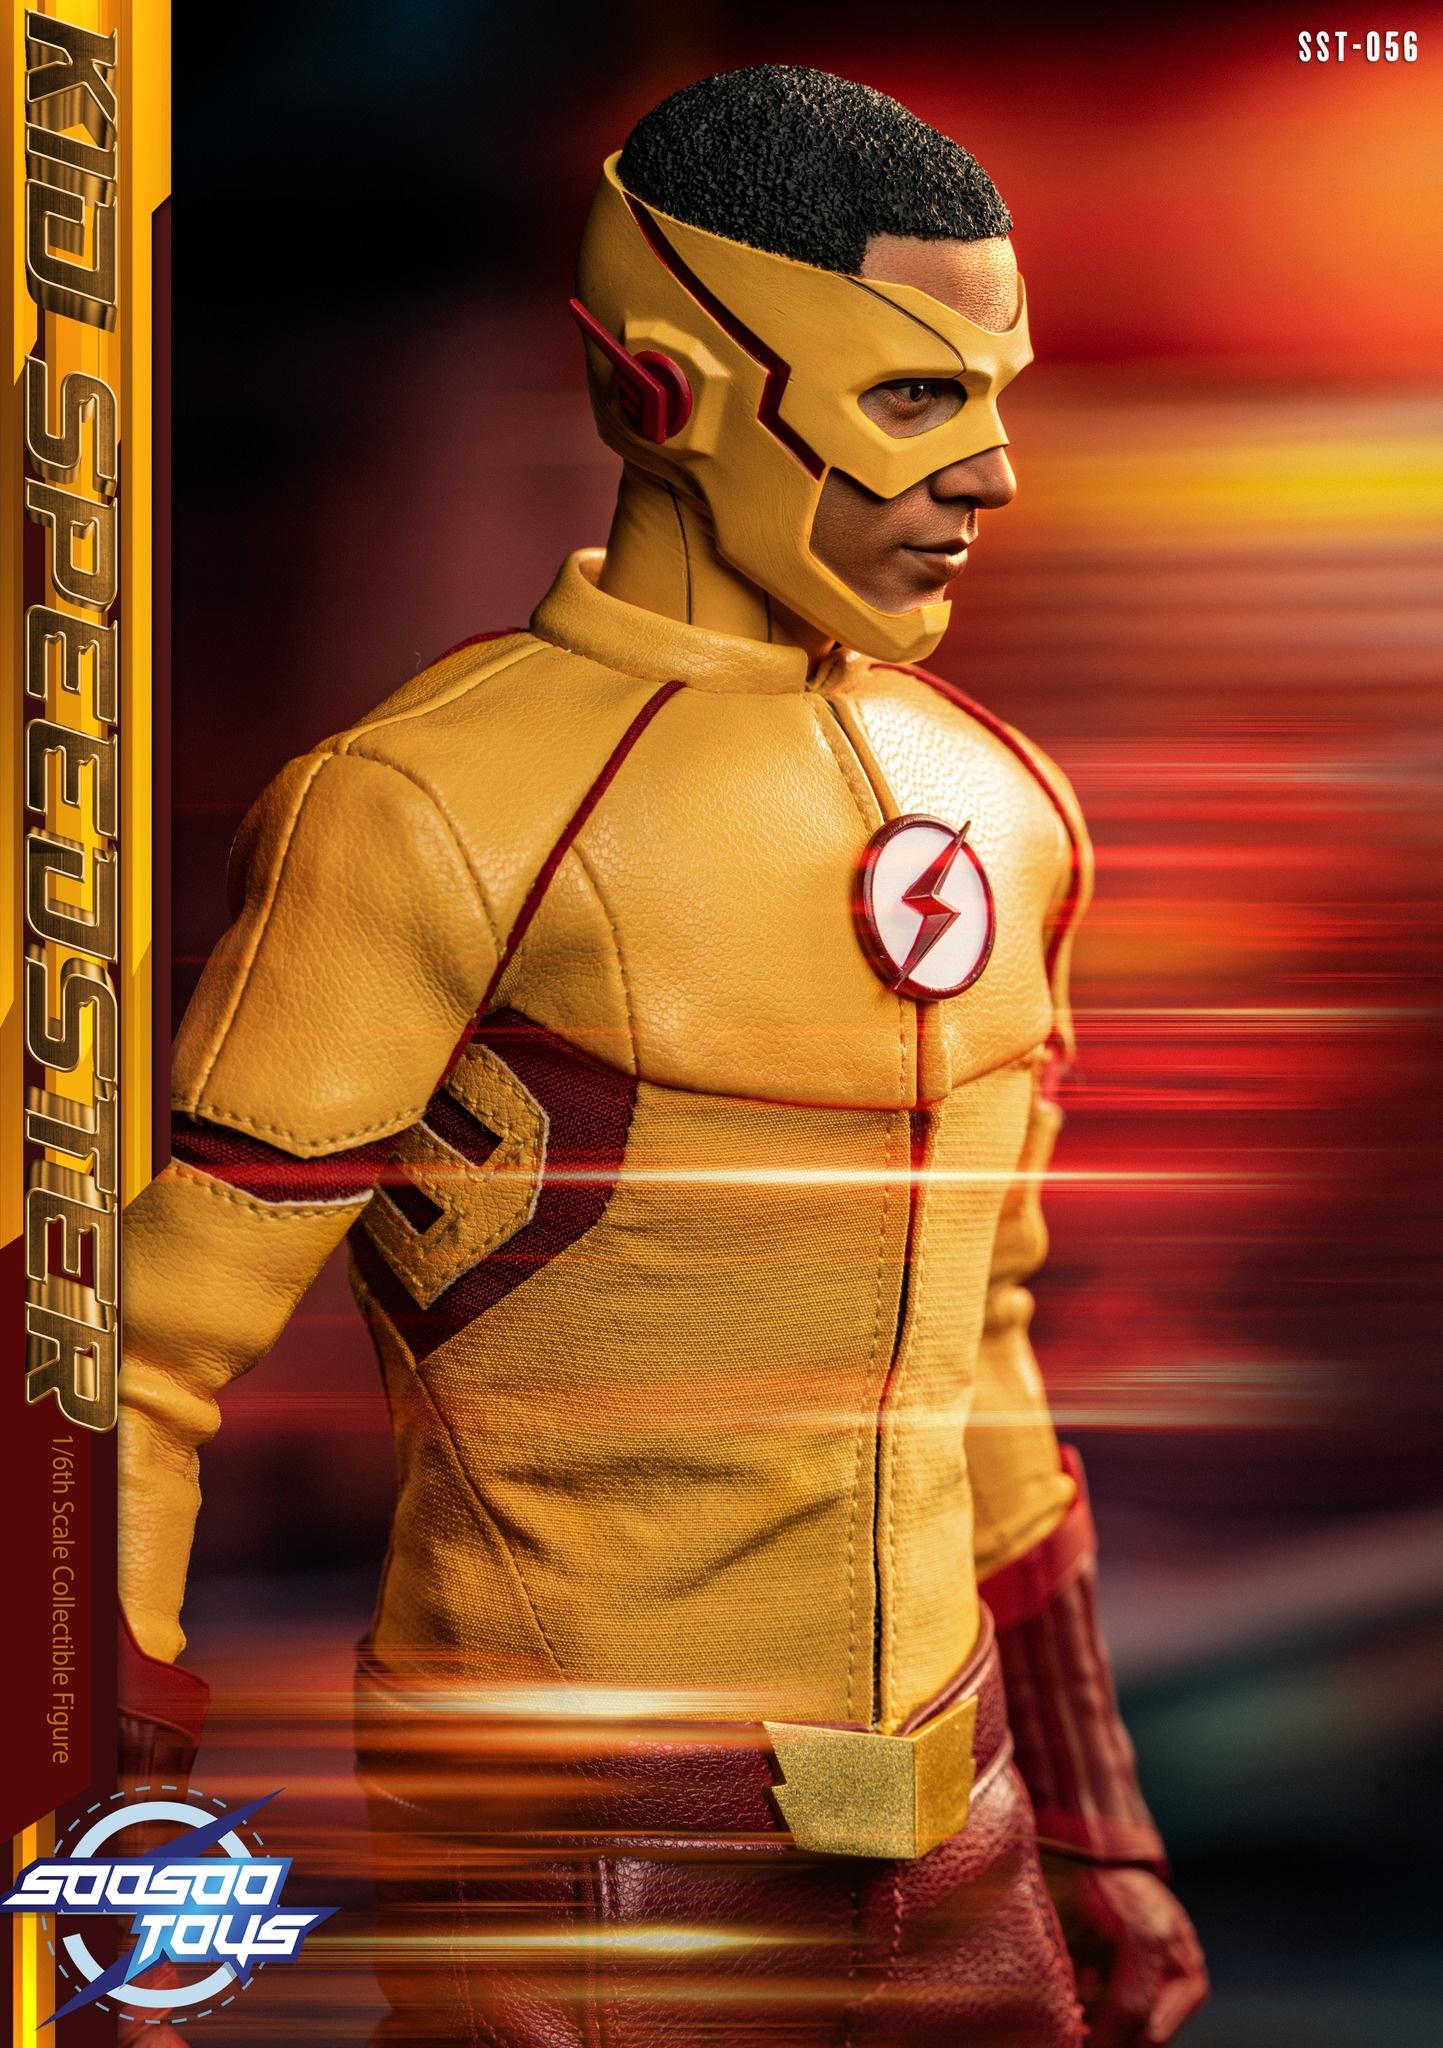 Male - NEW PRODUCT: Soosootoys 1/6 scale collectible SST-056: The Kid Speedster 3db617f41cef3db3c7812dee9eb8c70f